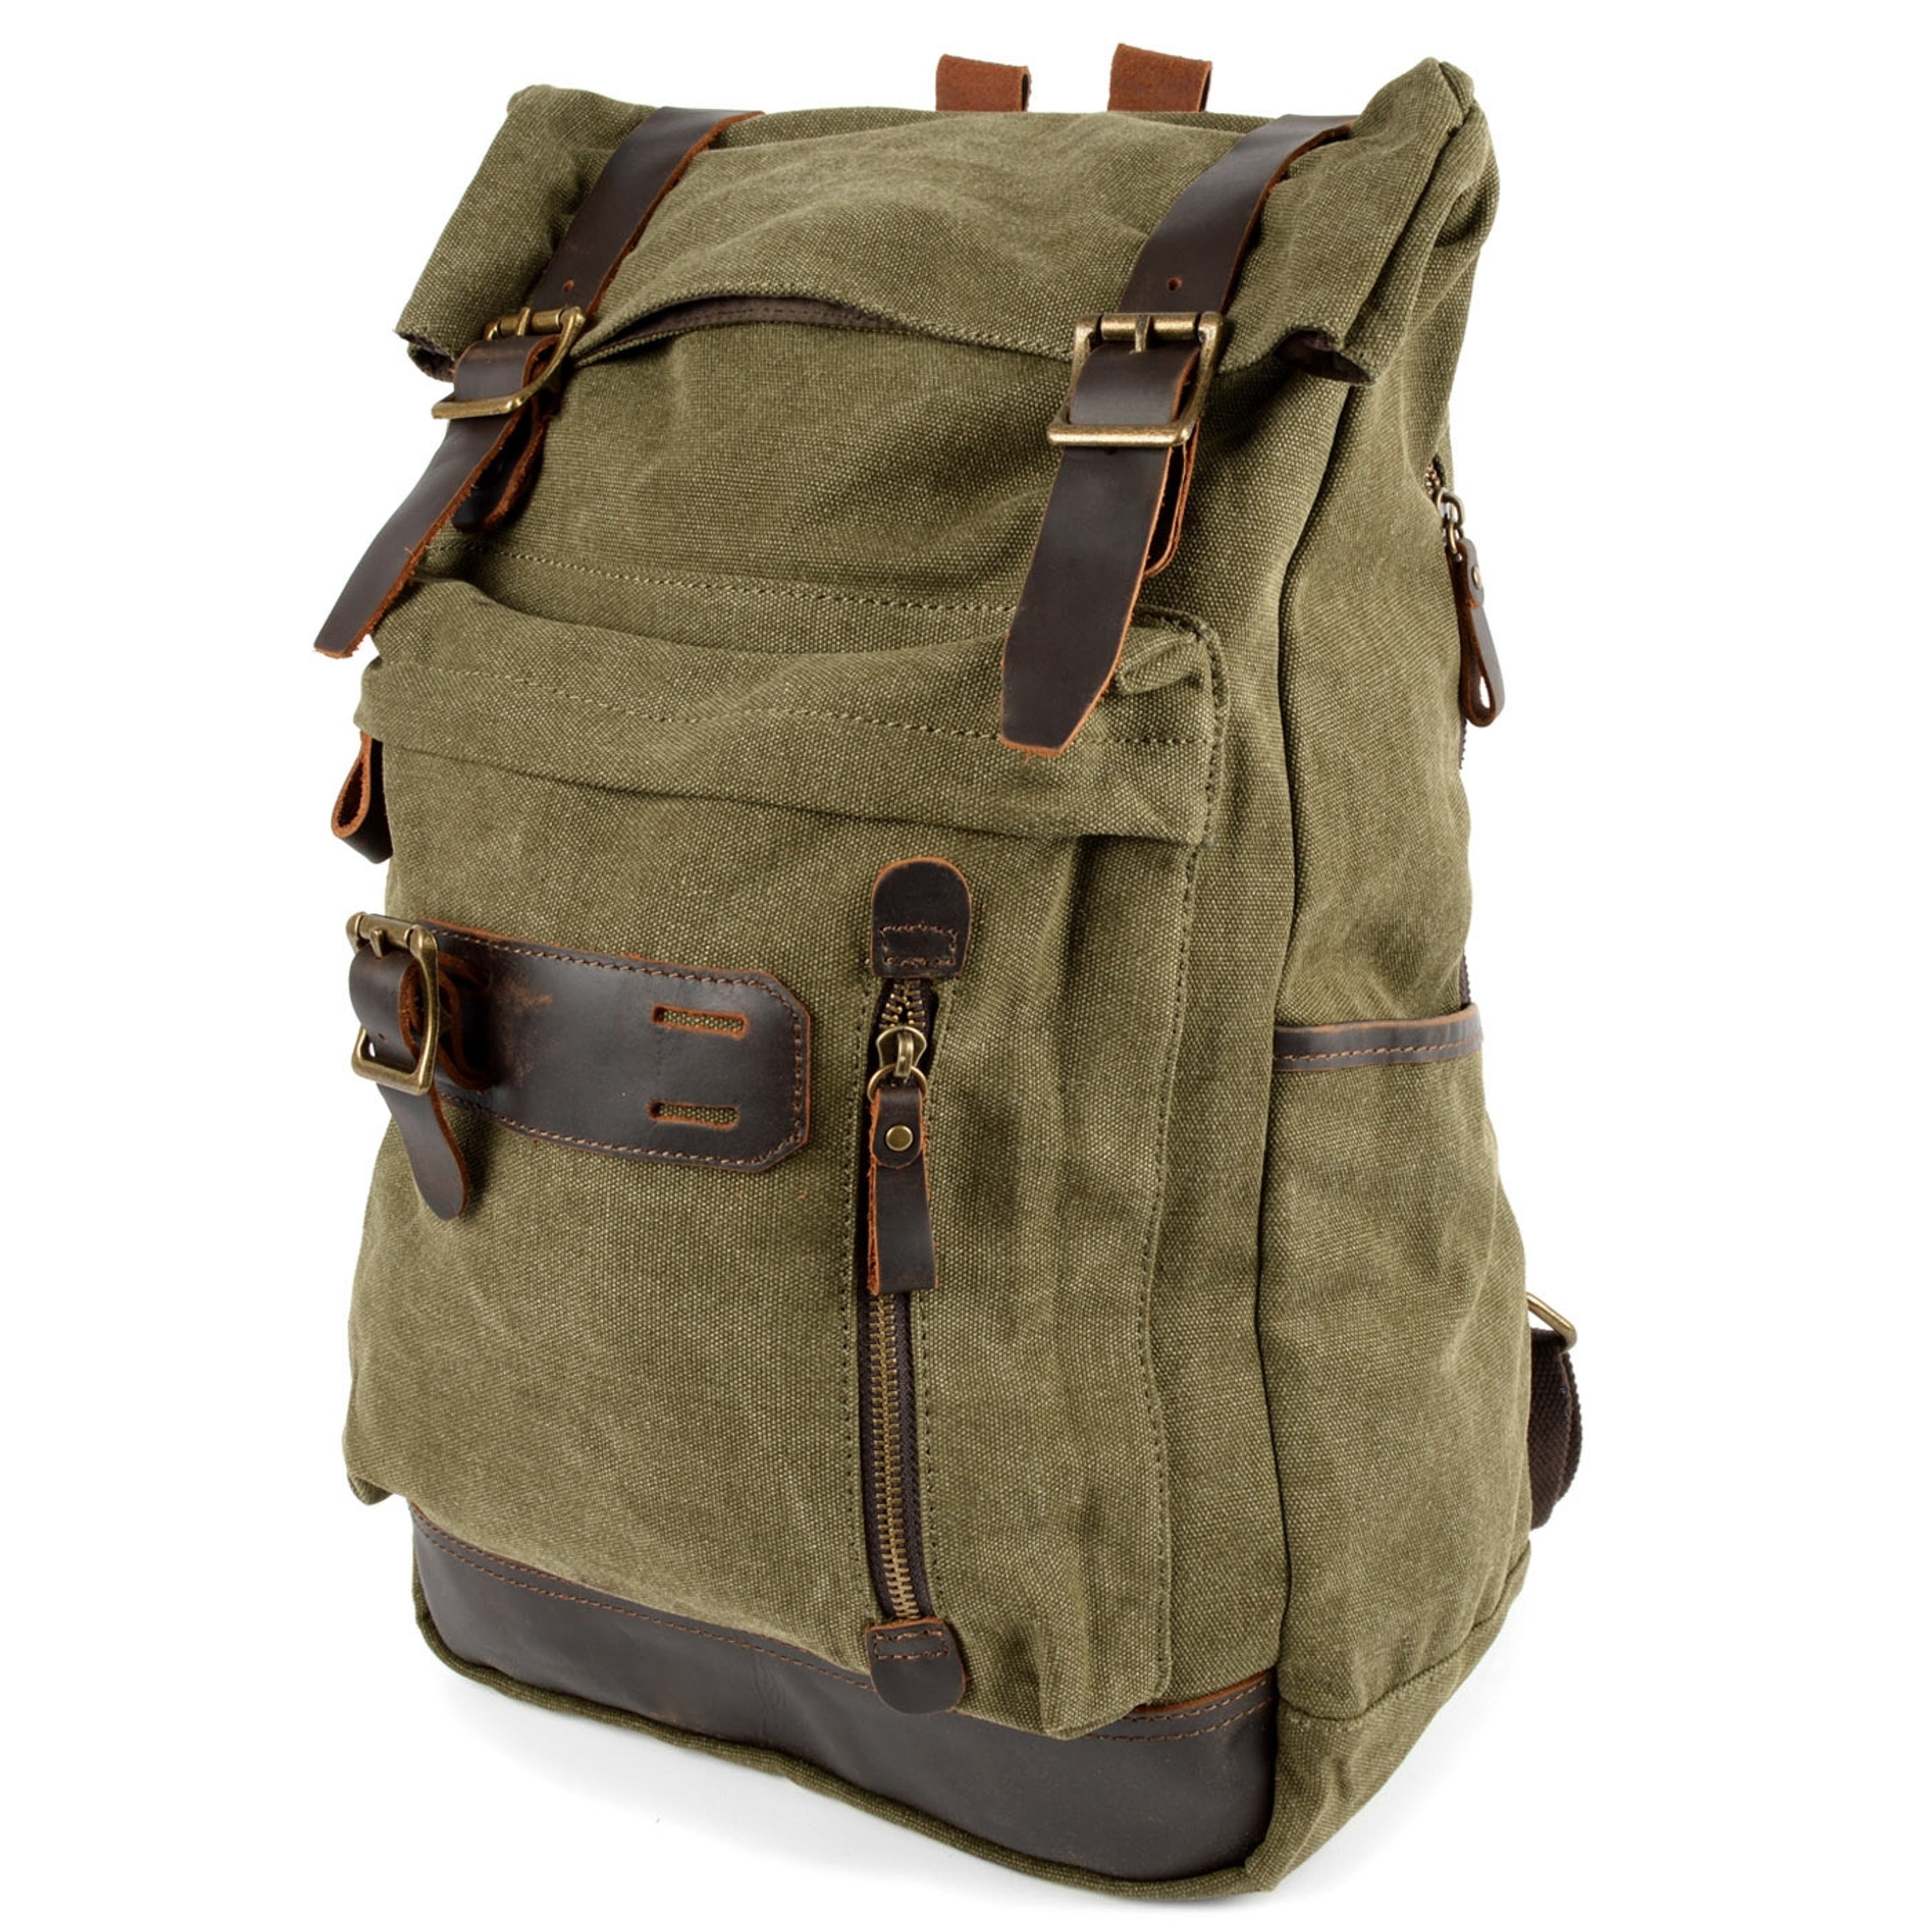 Rugged Vintage-Style Army Green Canvas & Leather Backpack